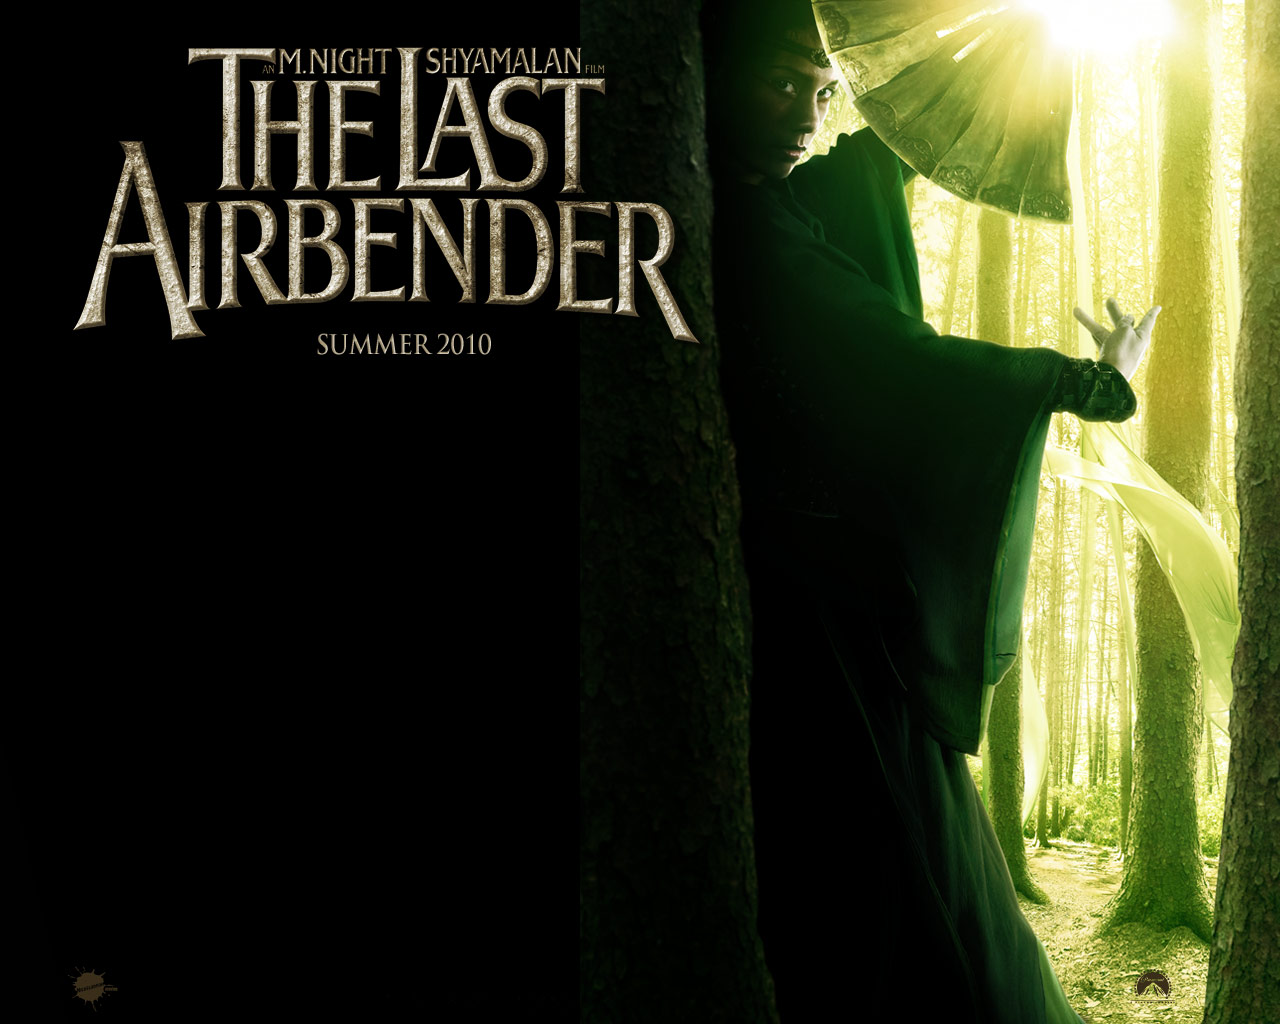 Download High quality The Last Airbender wallpaper / Movies / 1280x1024